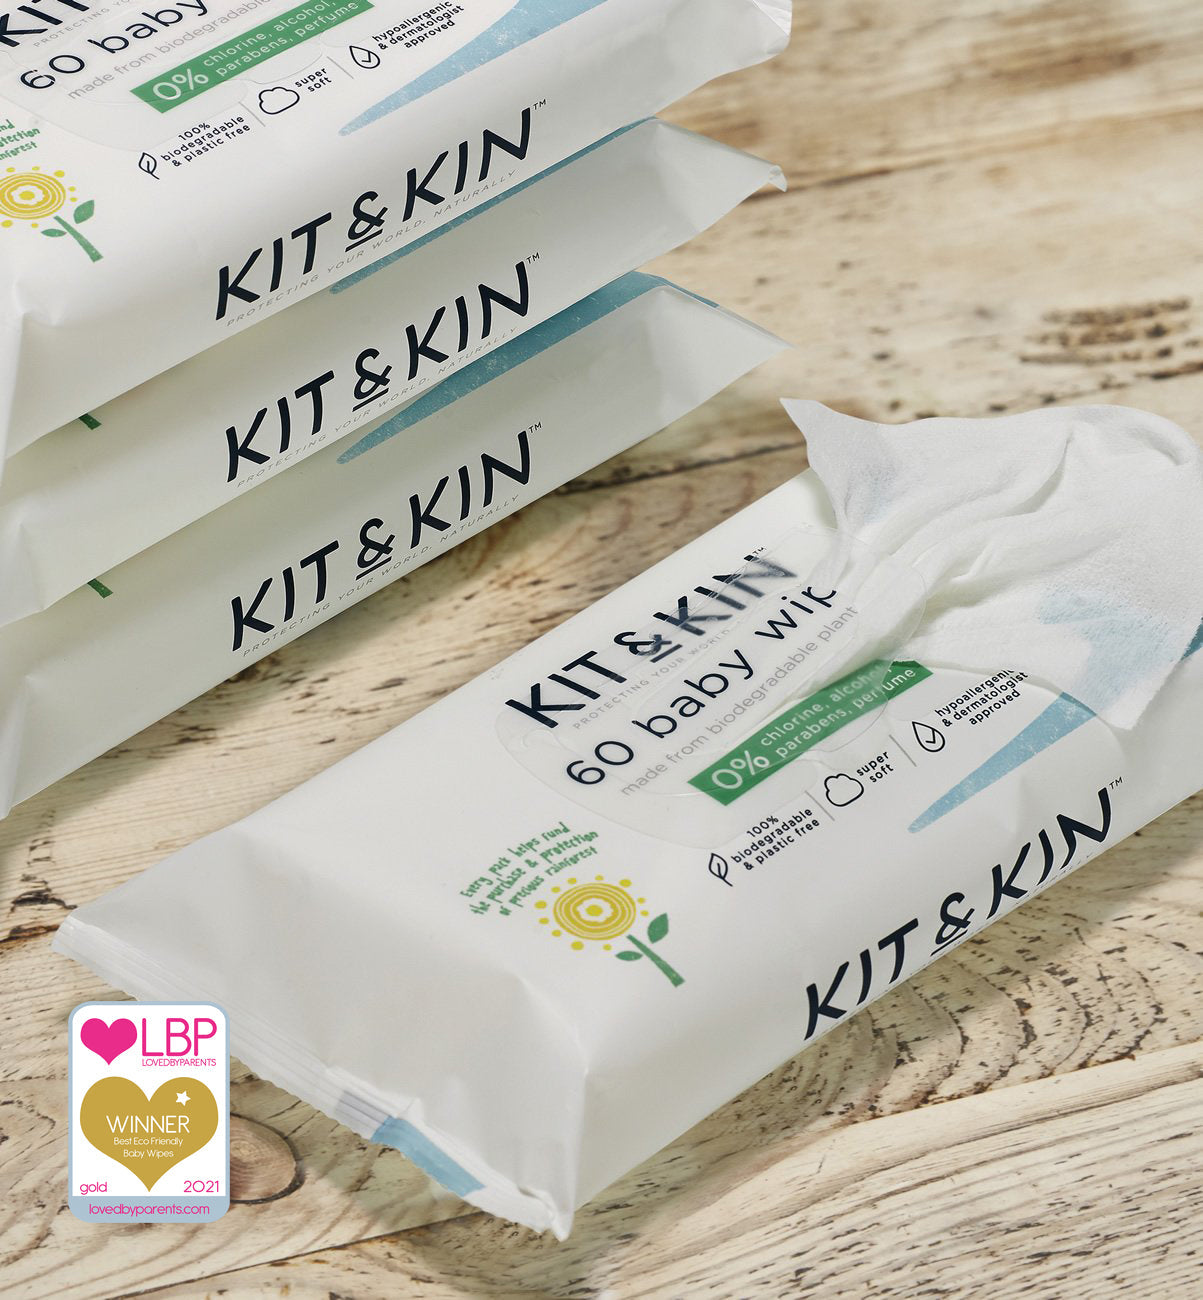 Kit and Kin Biodegradable Baby Wipes Bundle